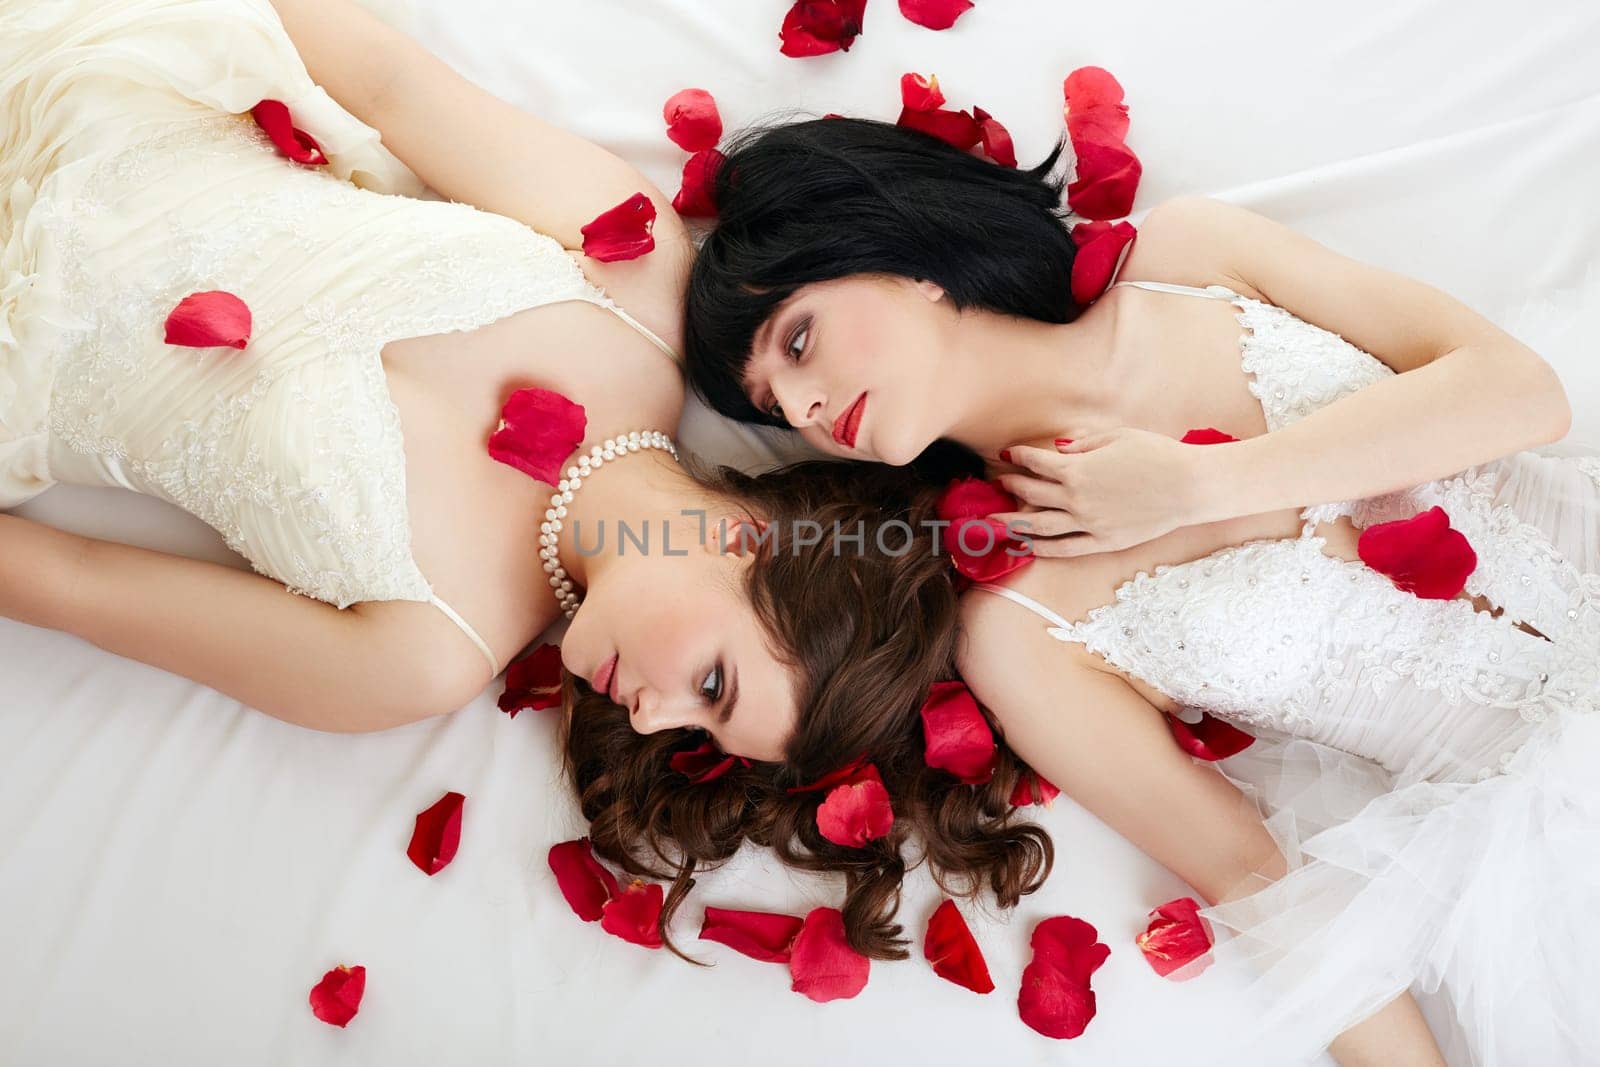 Concept of gay marriage. Lovely women posing in wedding dresses with petals